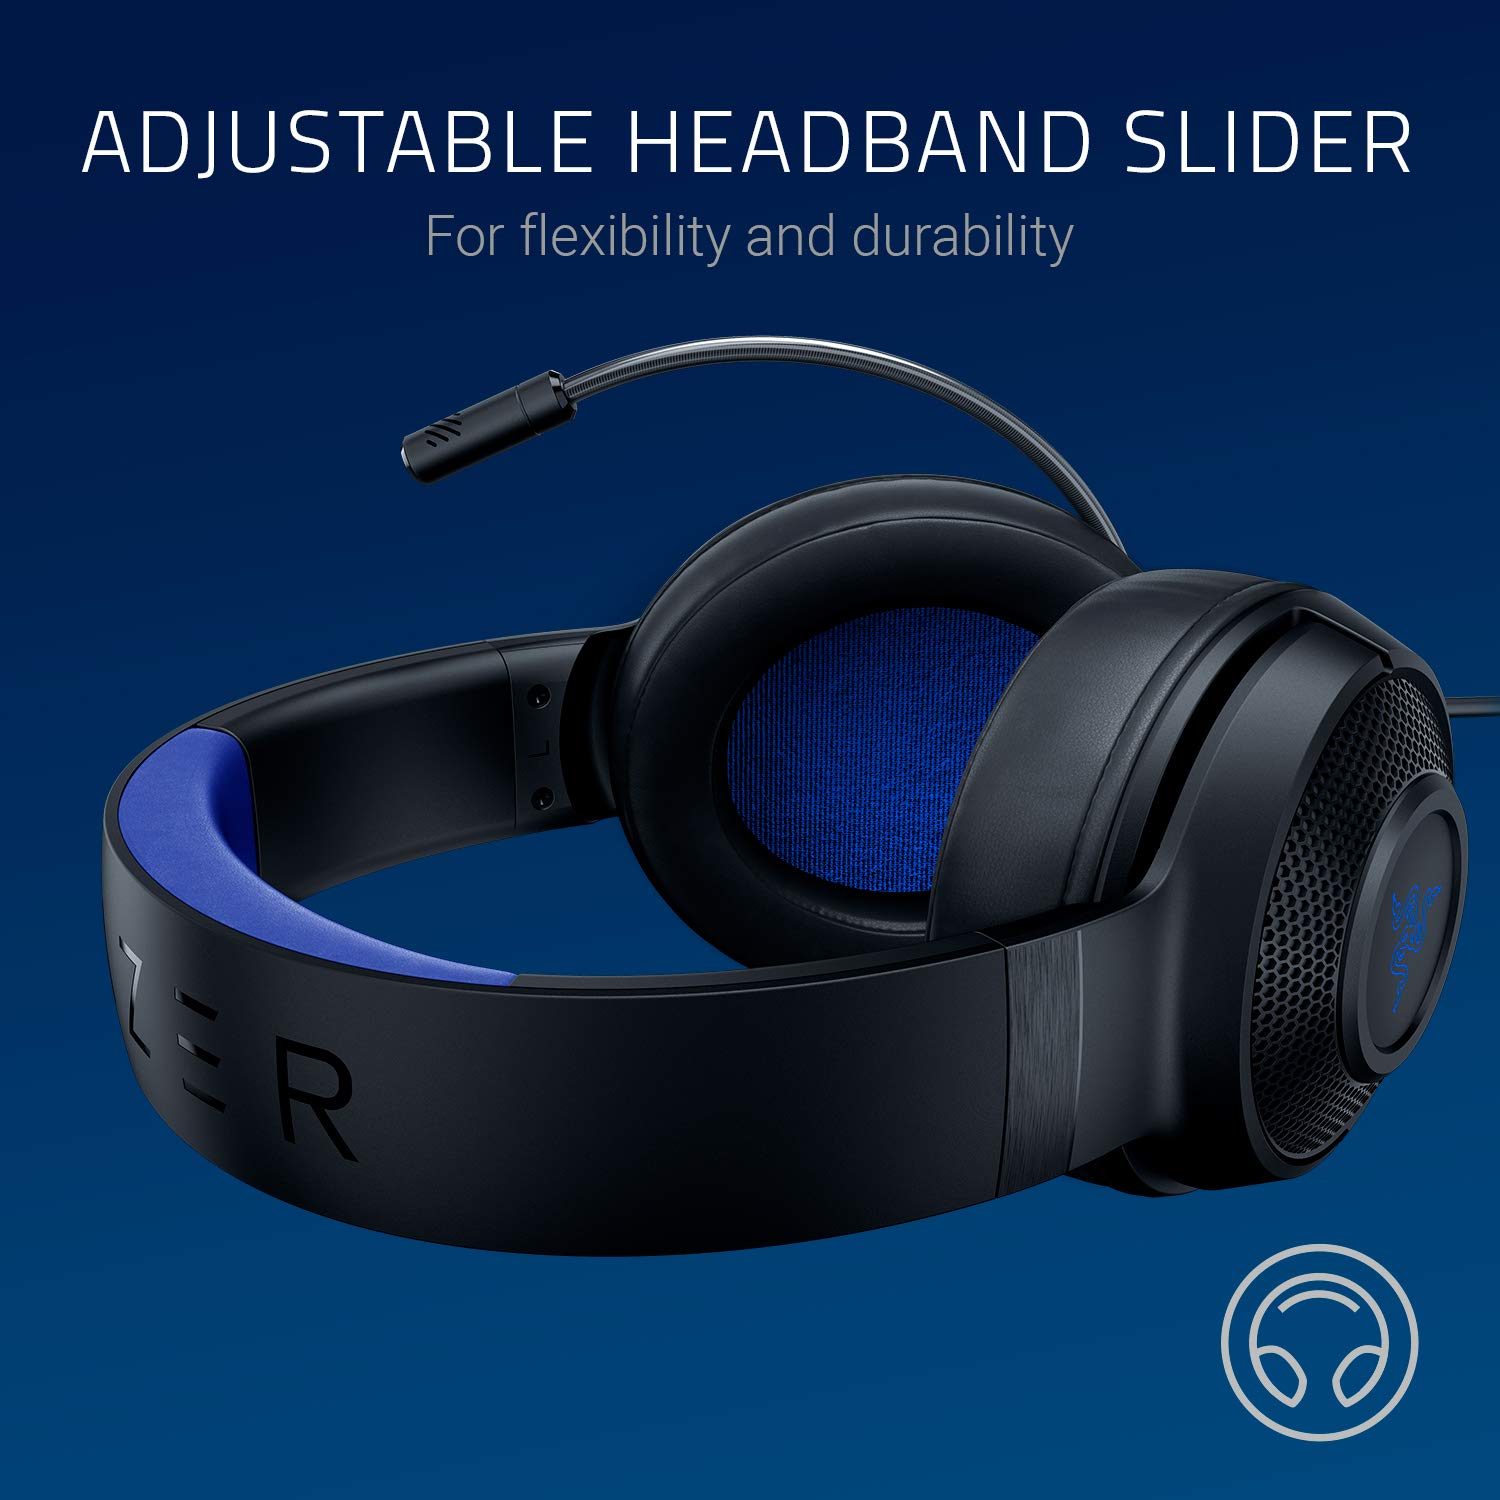 Razer Kraken X Ultralight Gaming Headset: 7.1 Surround Sound - Lightweight Aluminum Frame - Bendable Cardioid Microphone - for PC, PS4, PS5, Switch, Xbox One, Xbox Series X|S, Mobile - Black/Blue